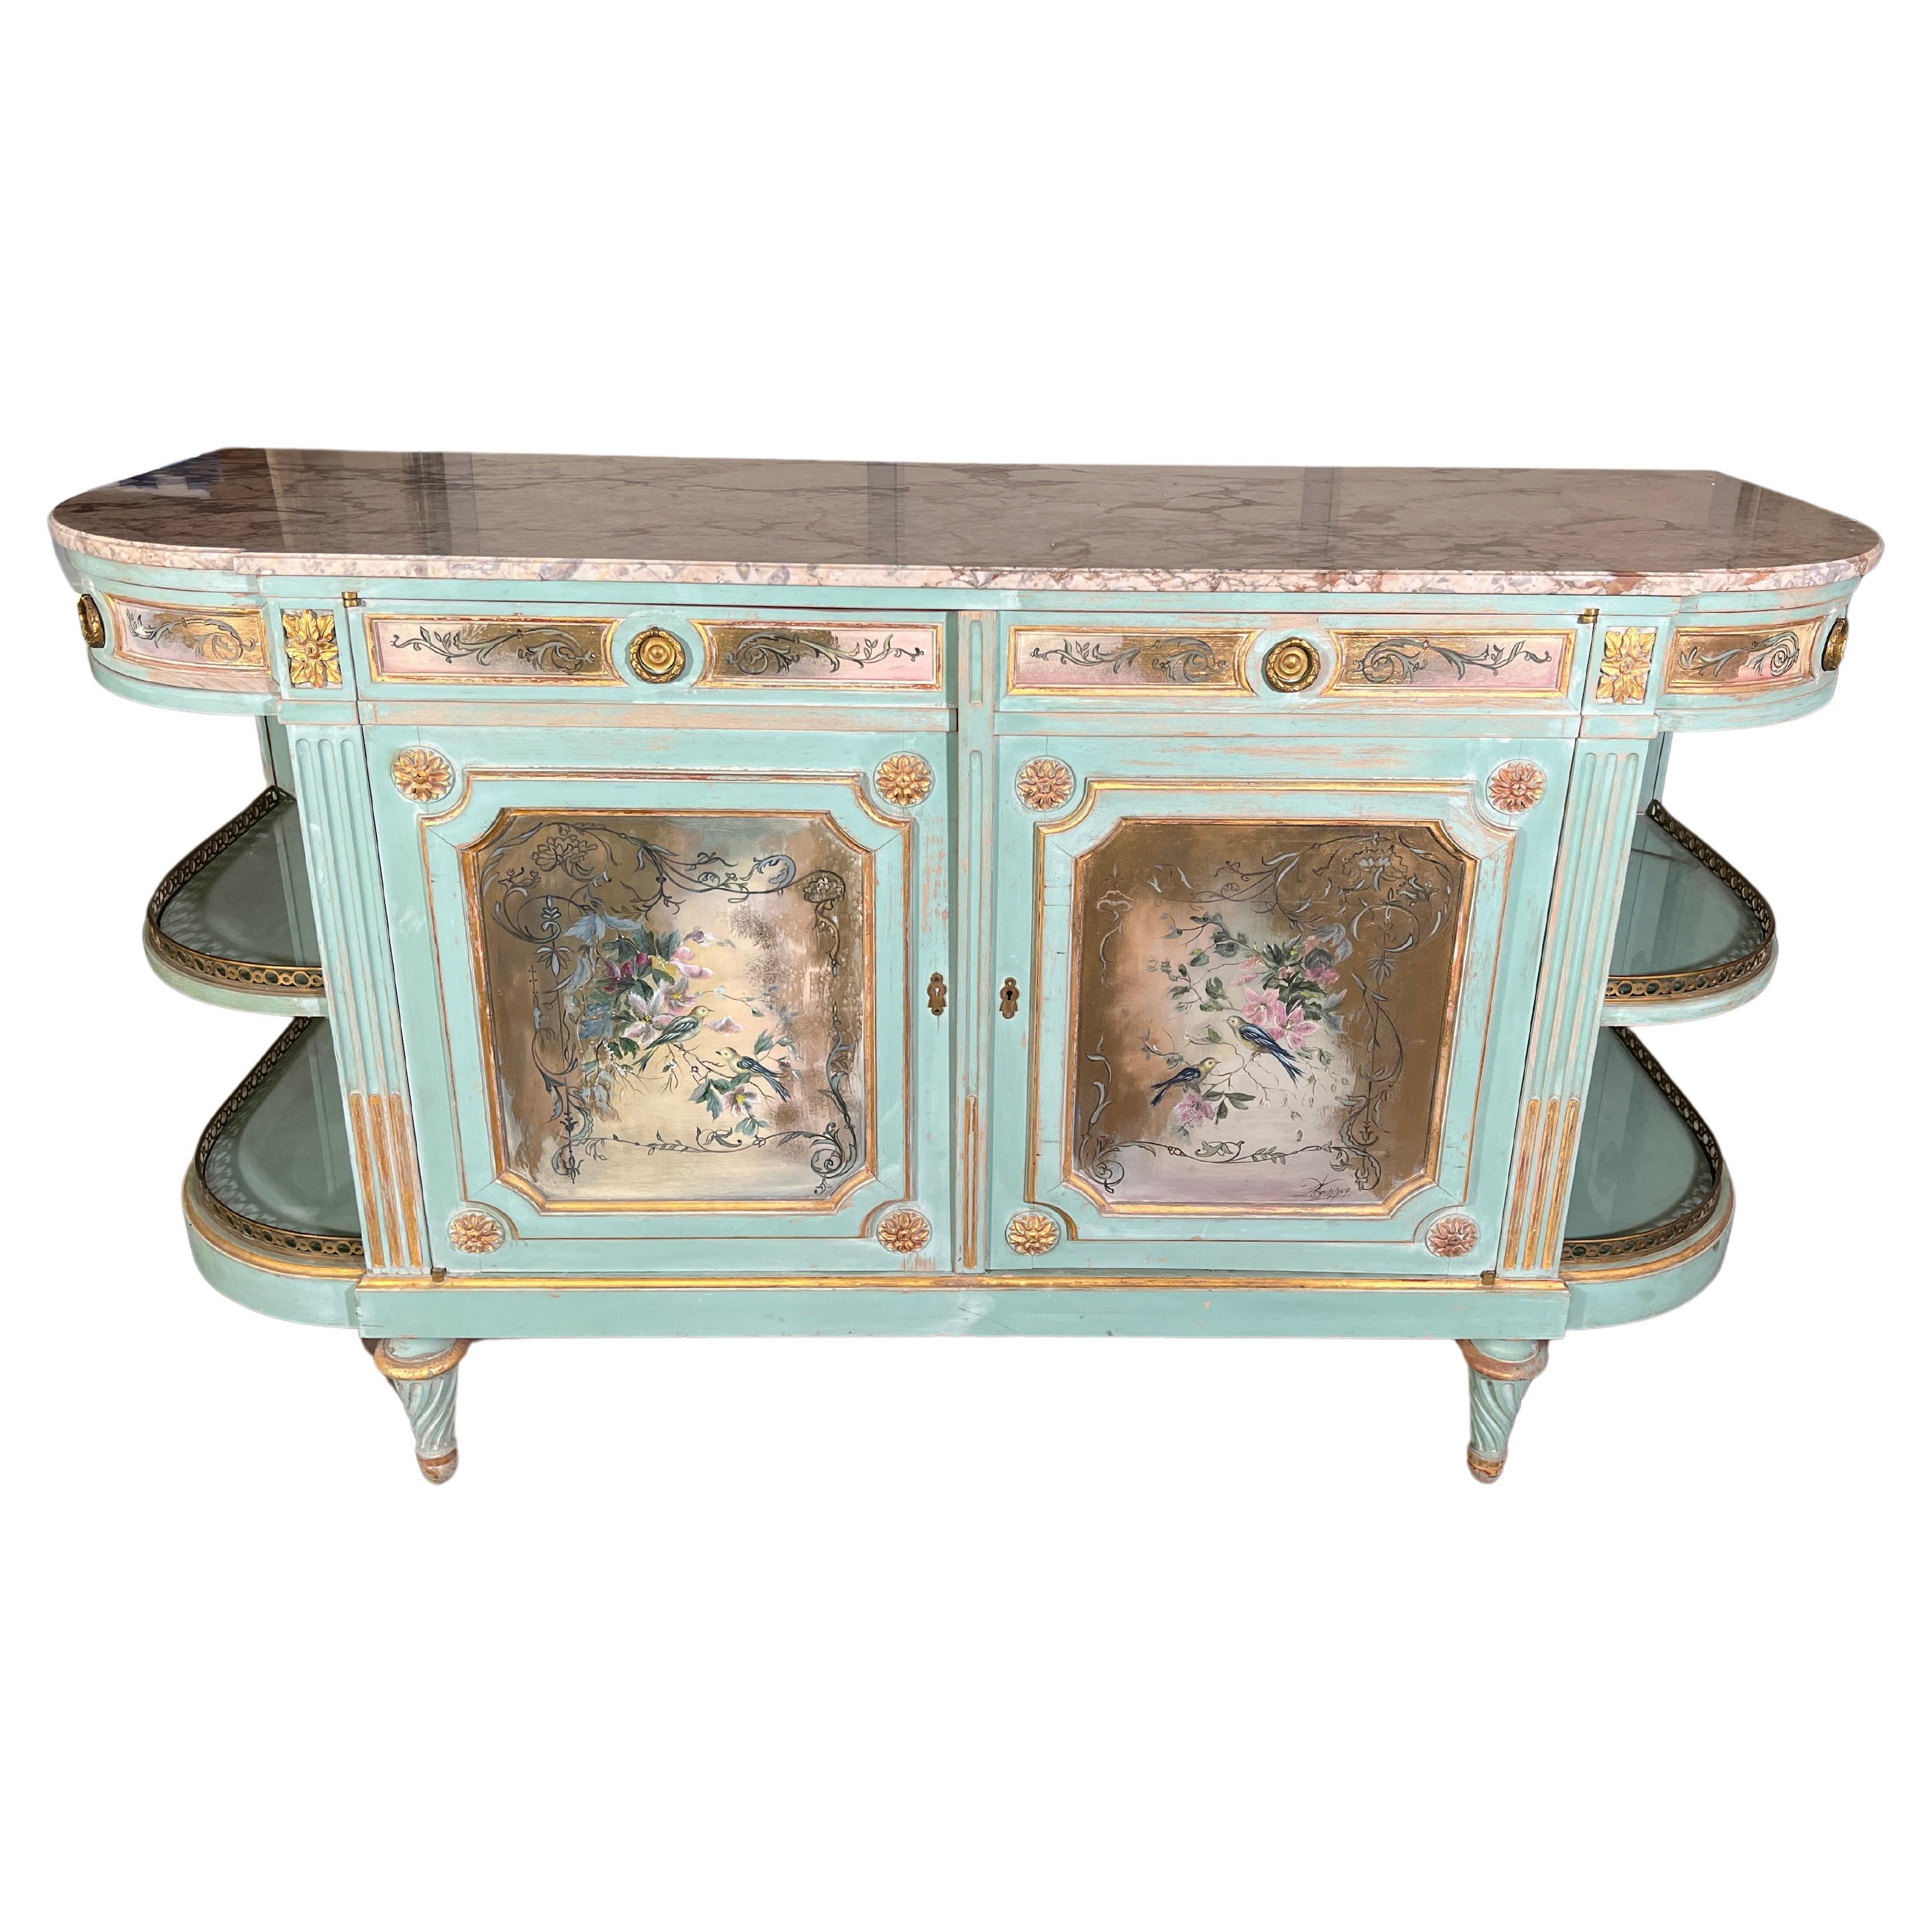 19th Century (Late) Louis XVI Style Painted Sideboard From Soubrier Paris